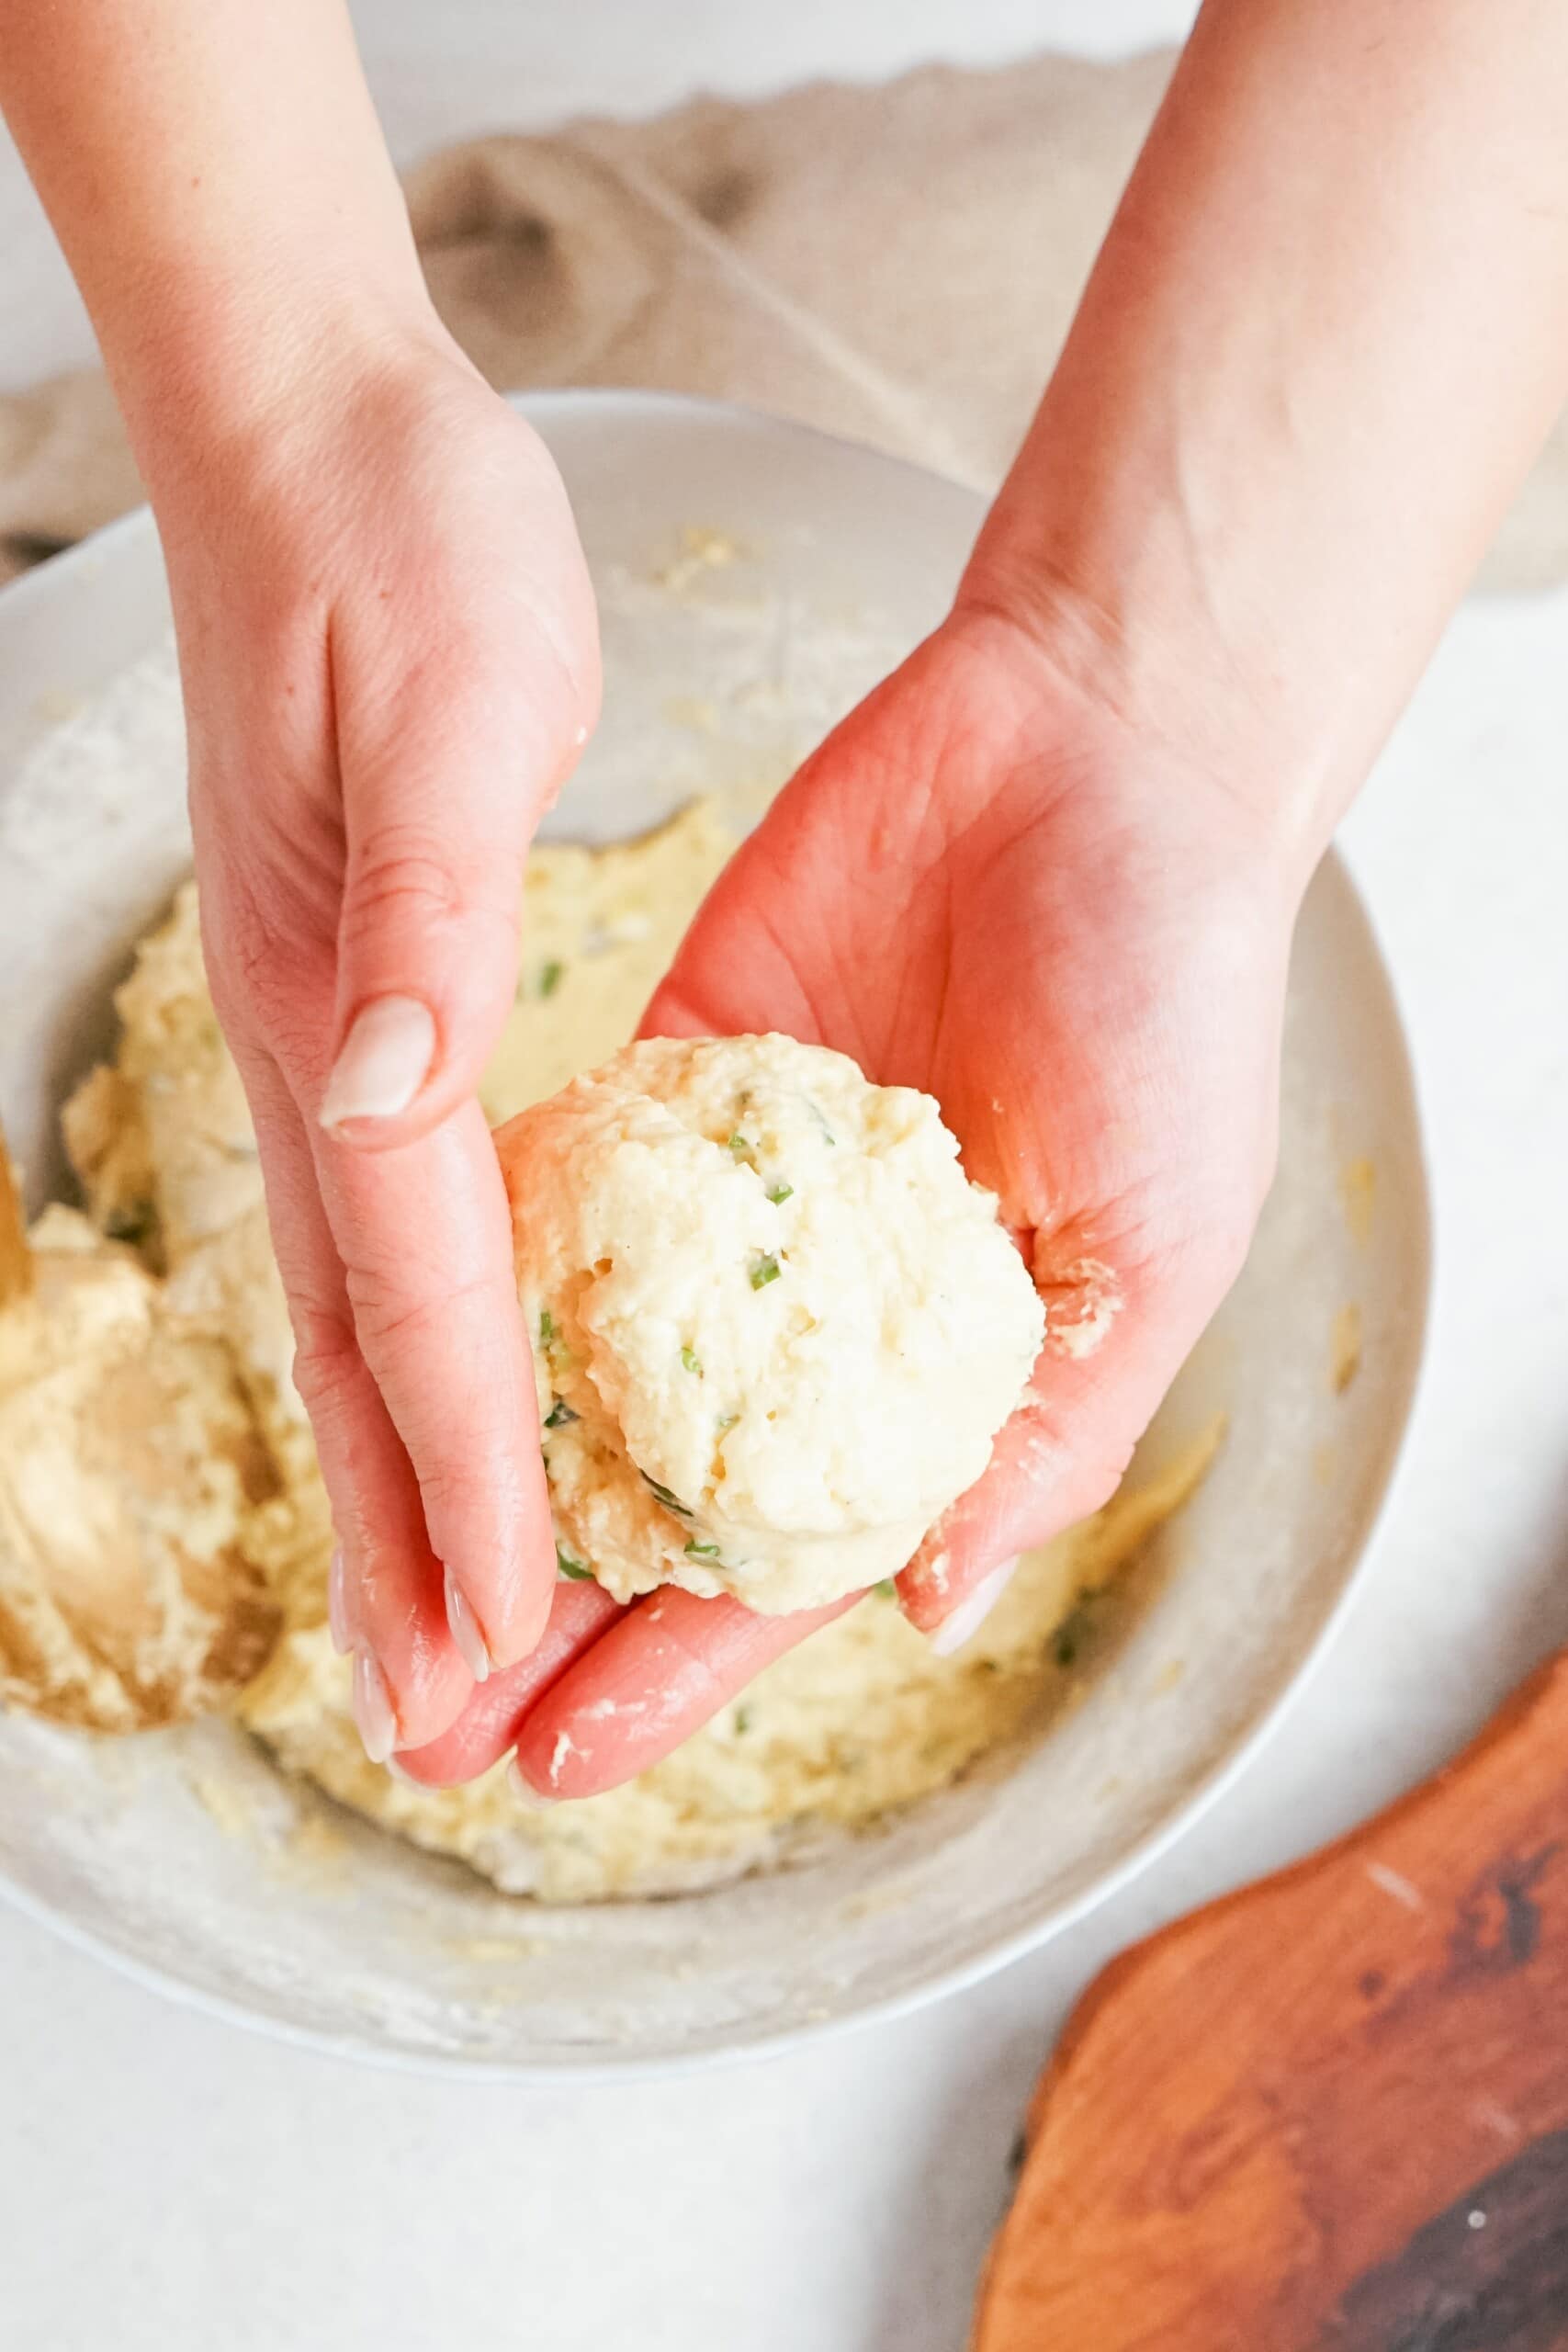 womans hands forming a ball with mashed potatoes